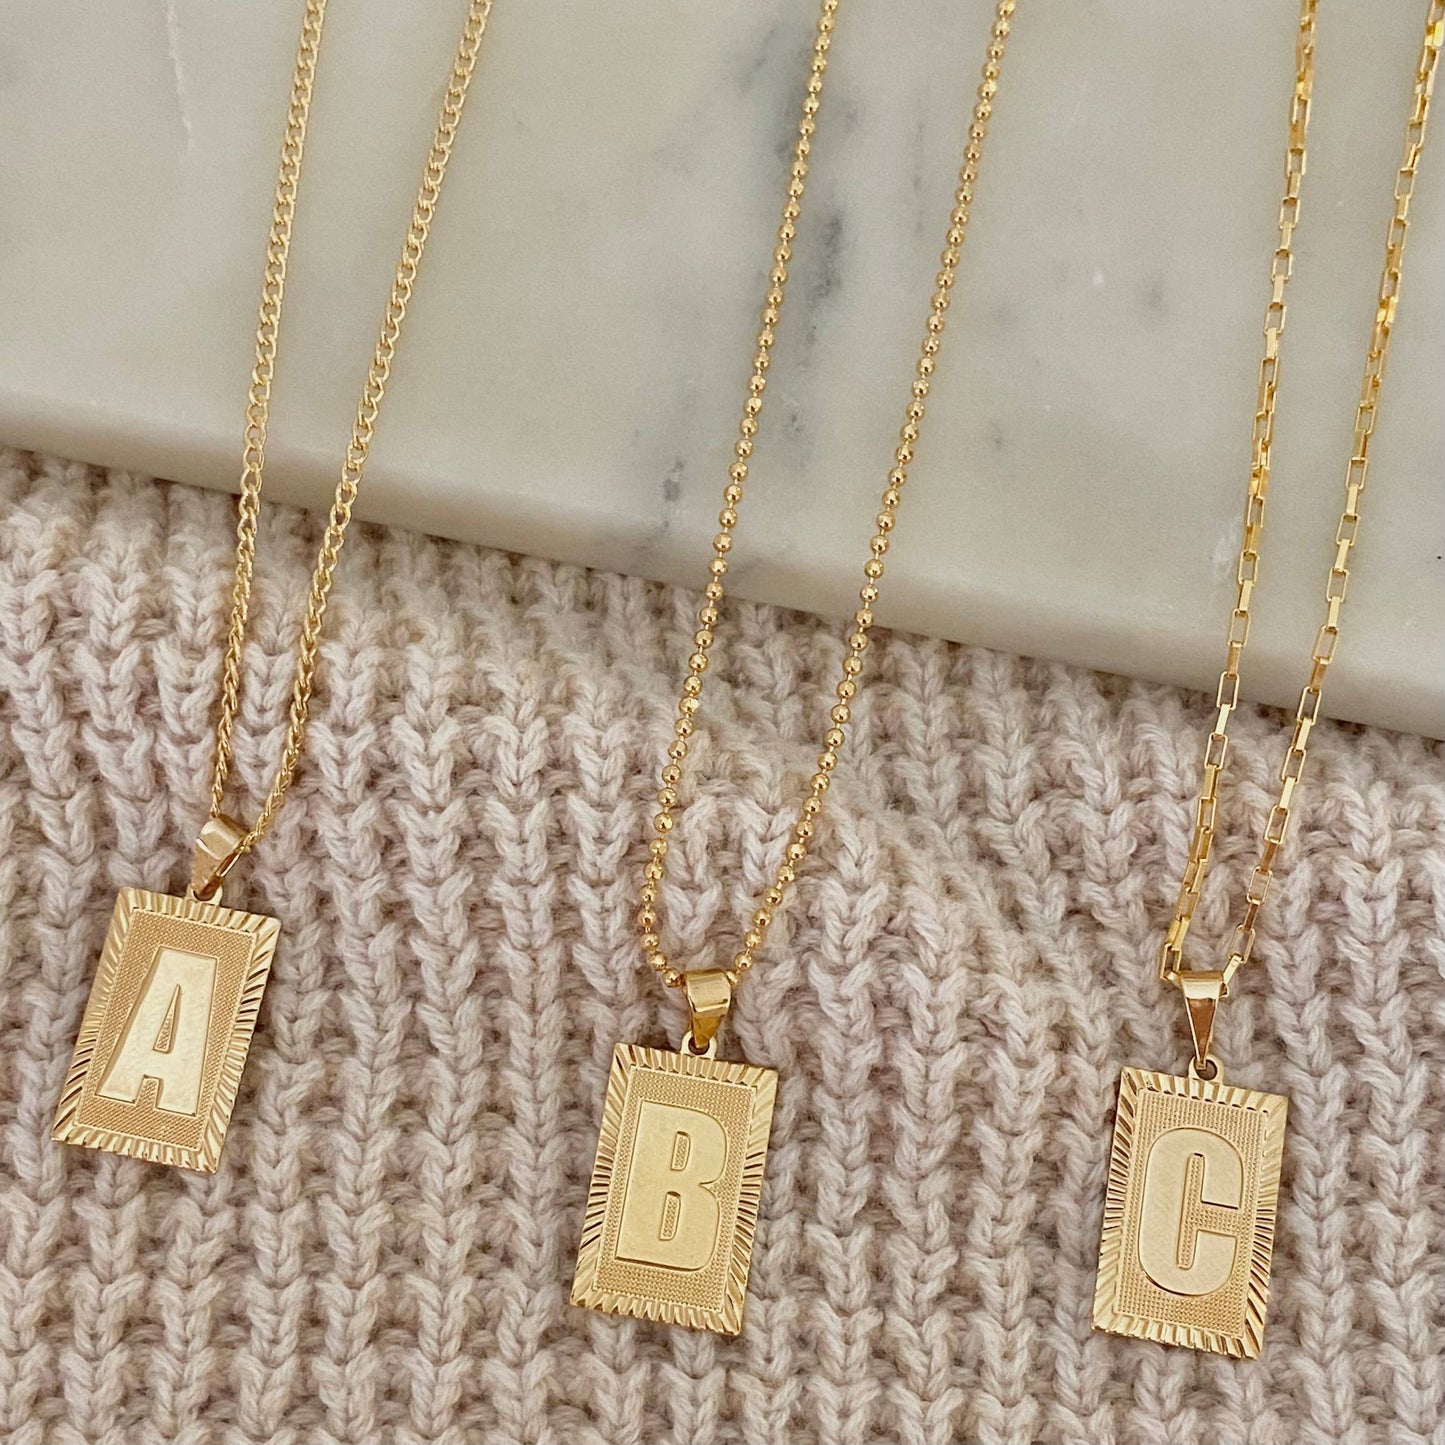 18k Gold Filled Initial D Necklace waterproof